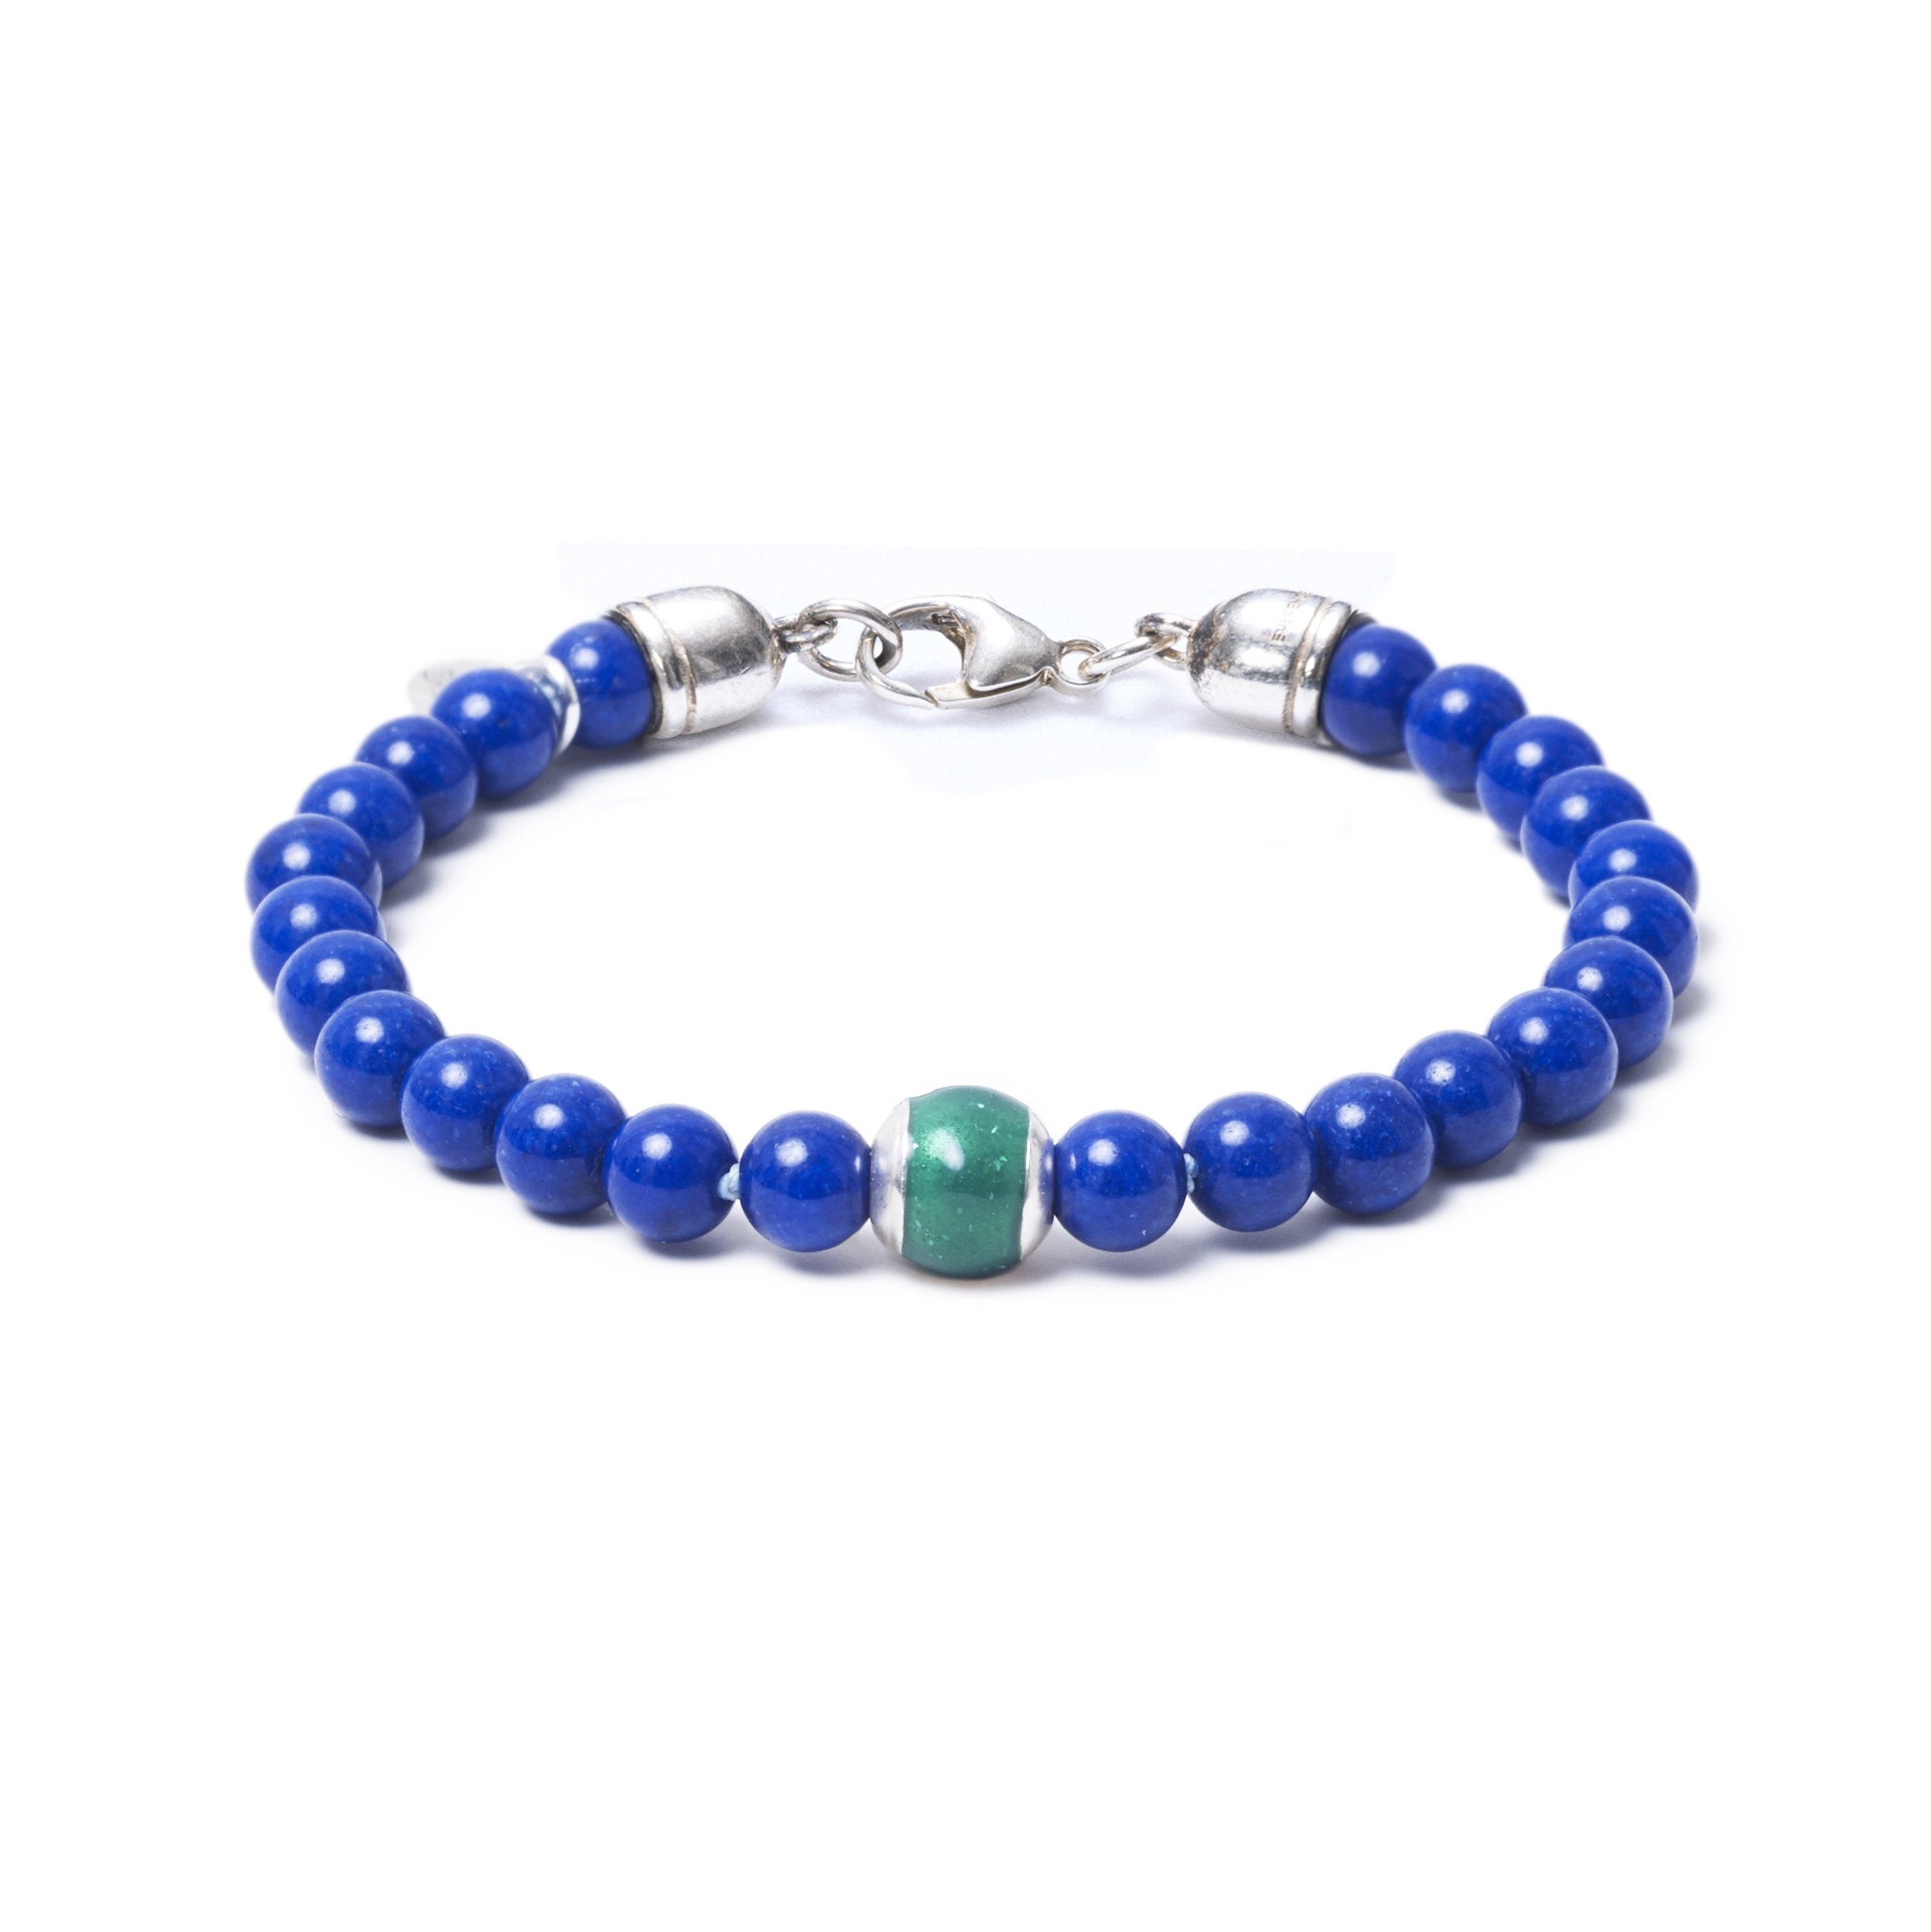 Lapis Lazuli, One Everence Bead everence.life Green Lobster Claw 7